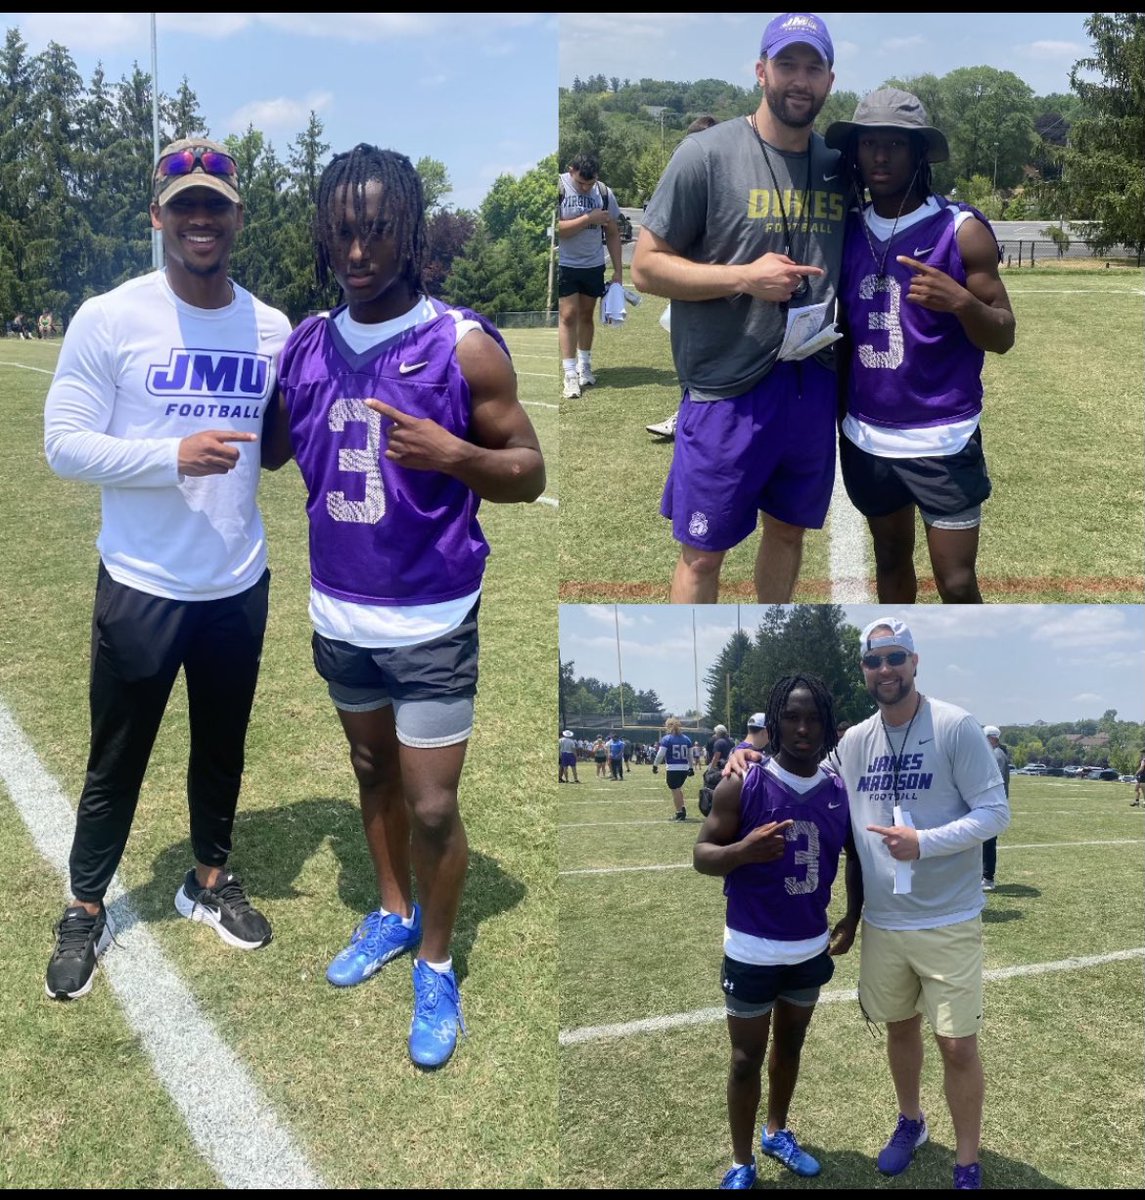 Had a Great Camp Day at JMU ‼️Love the atmosphere there will be back soon @Coach_BHaines @CoachShanahan_ @Coach_JMill @JMUFootball Thank you coaches #GODUKES🤍💜